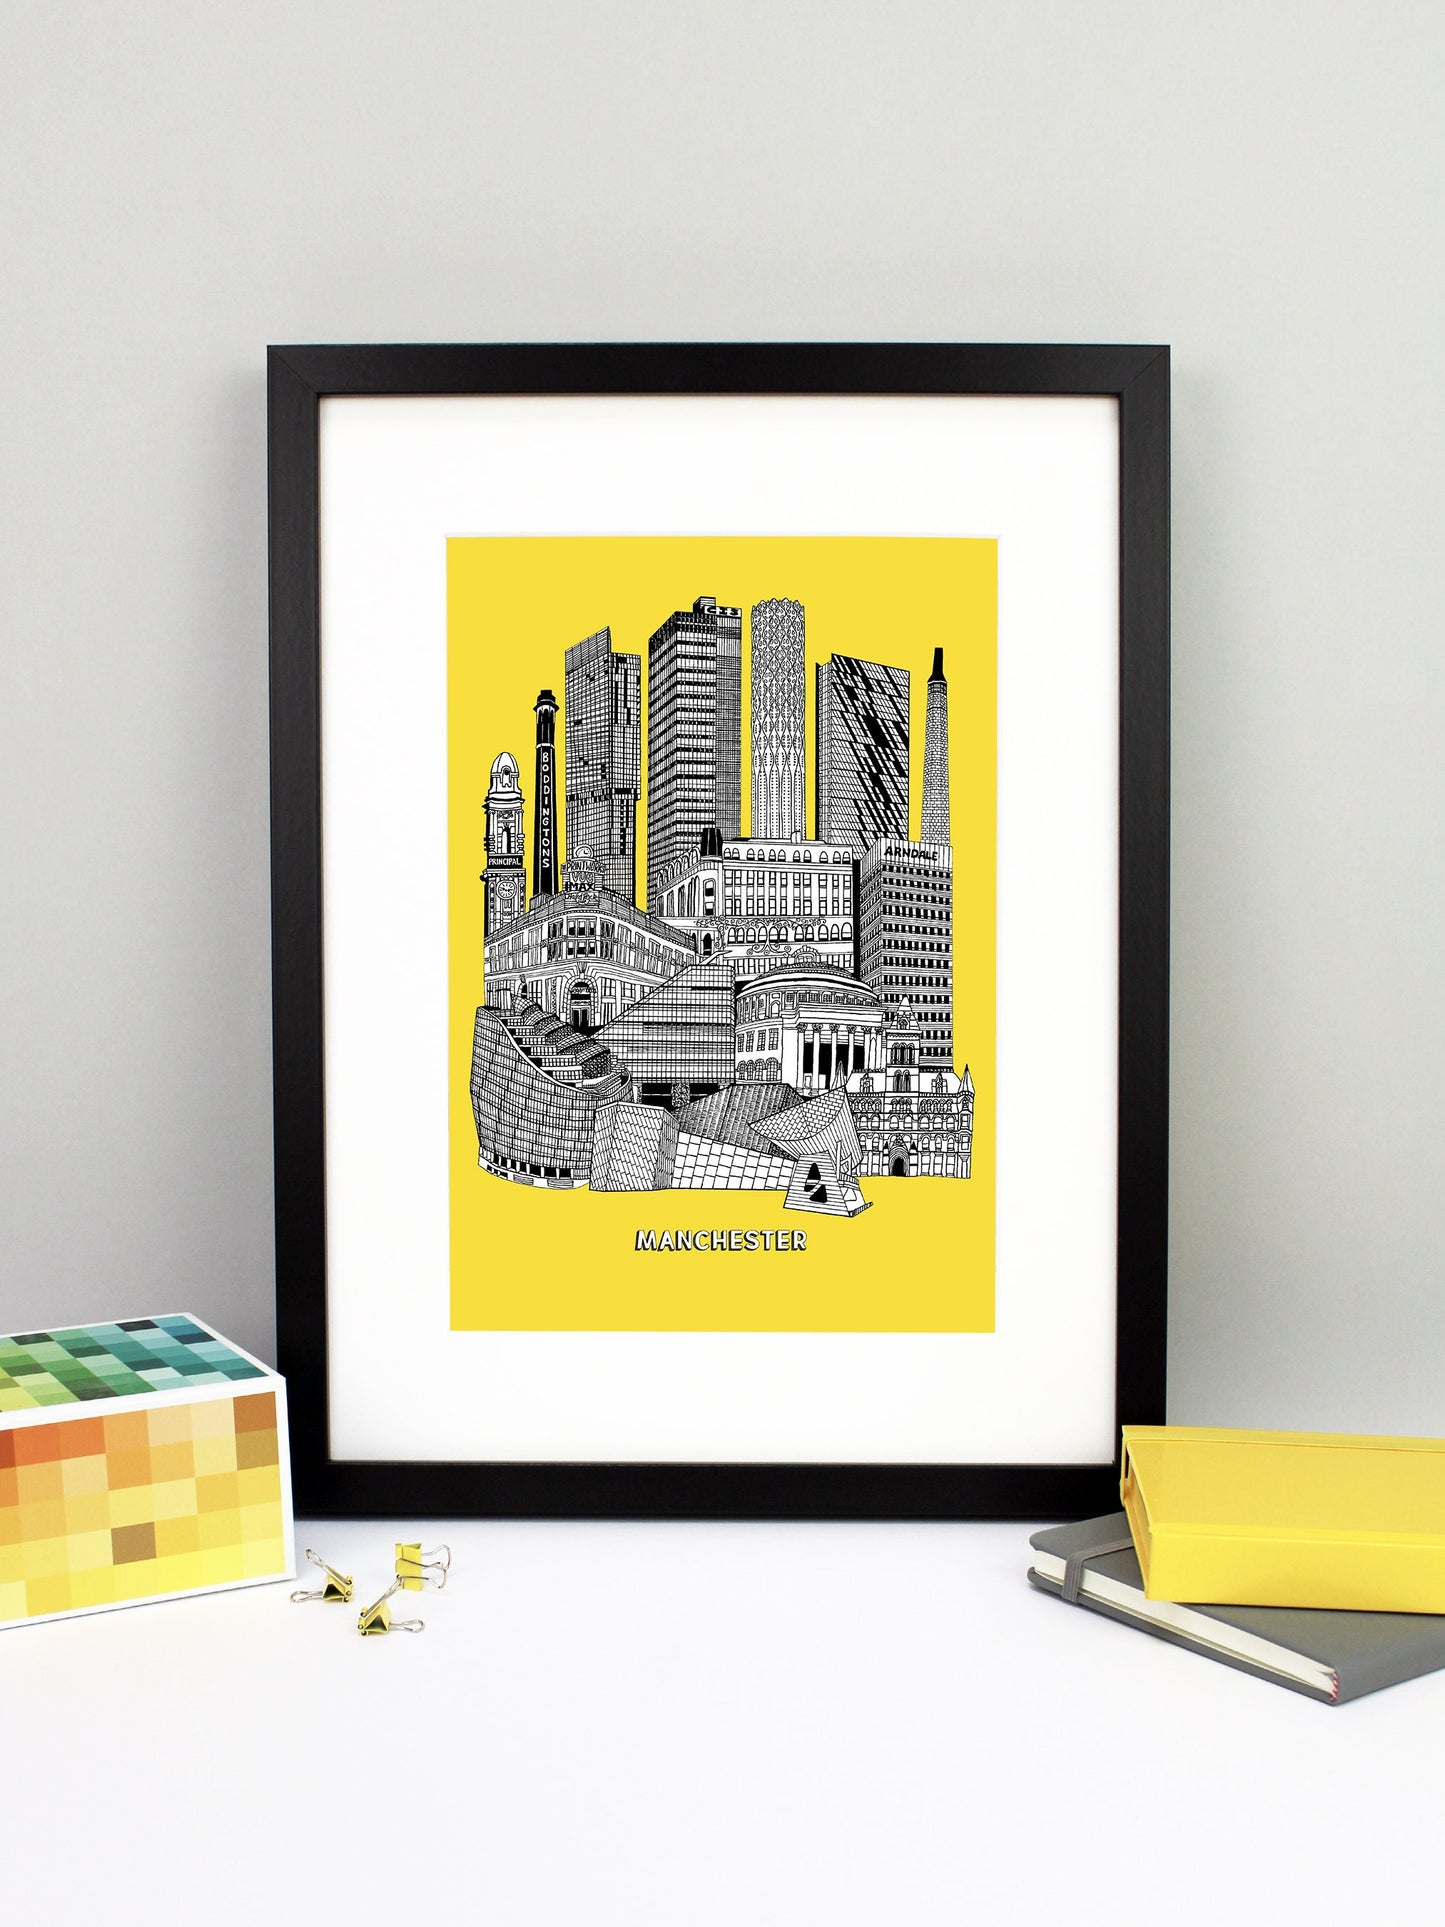 Personalised Manchester City Illustration Print